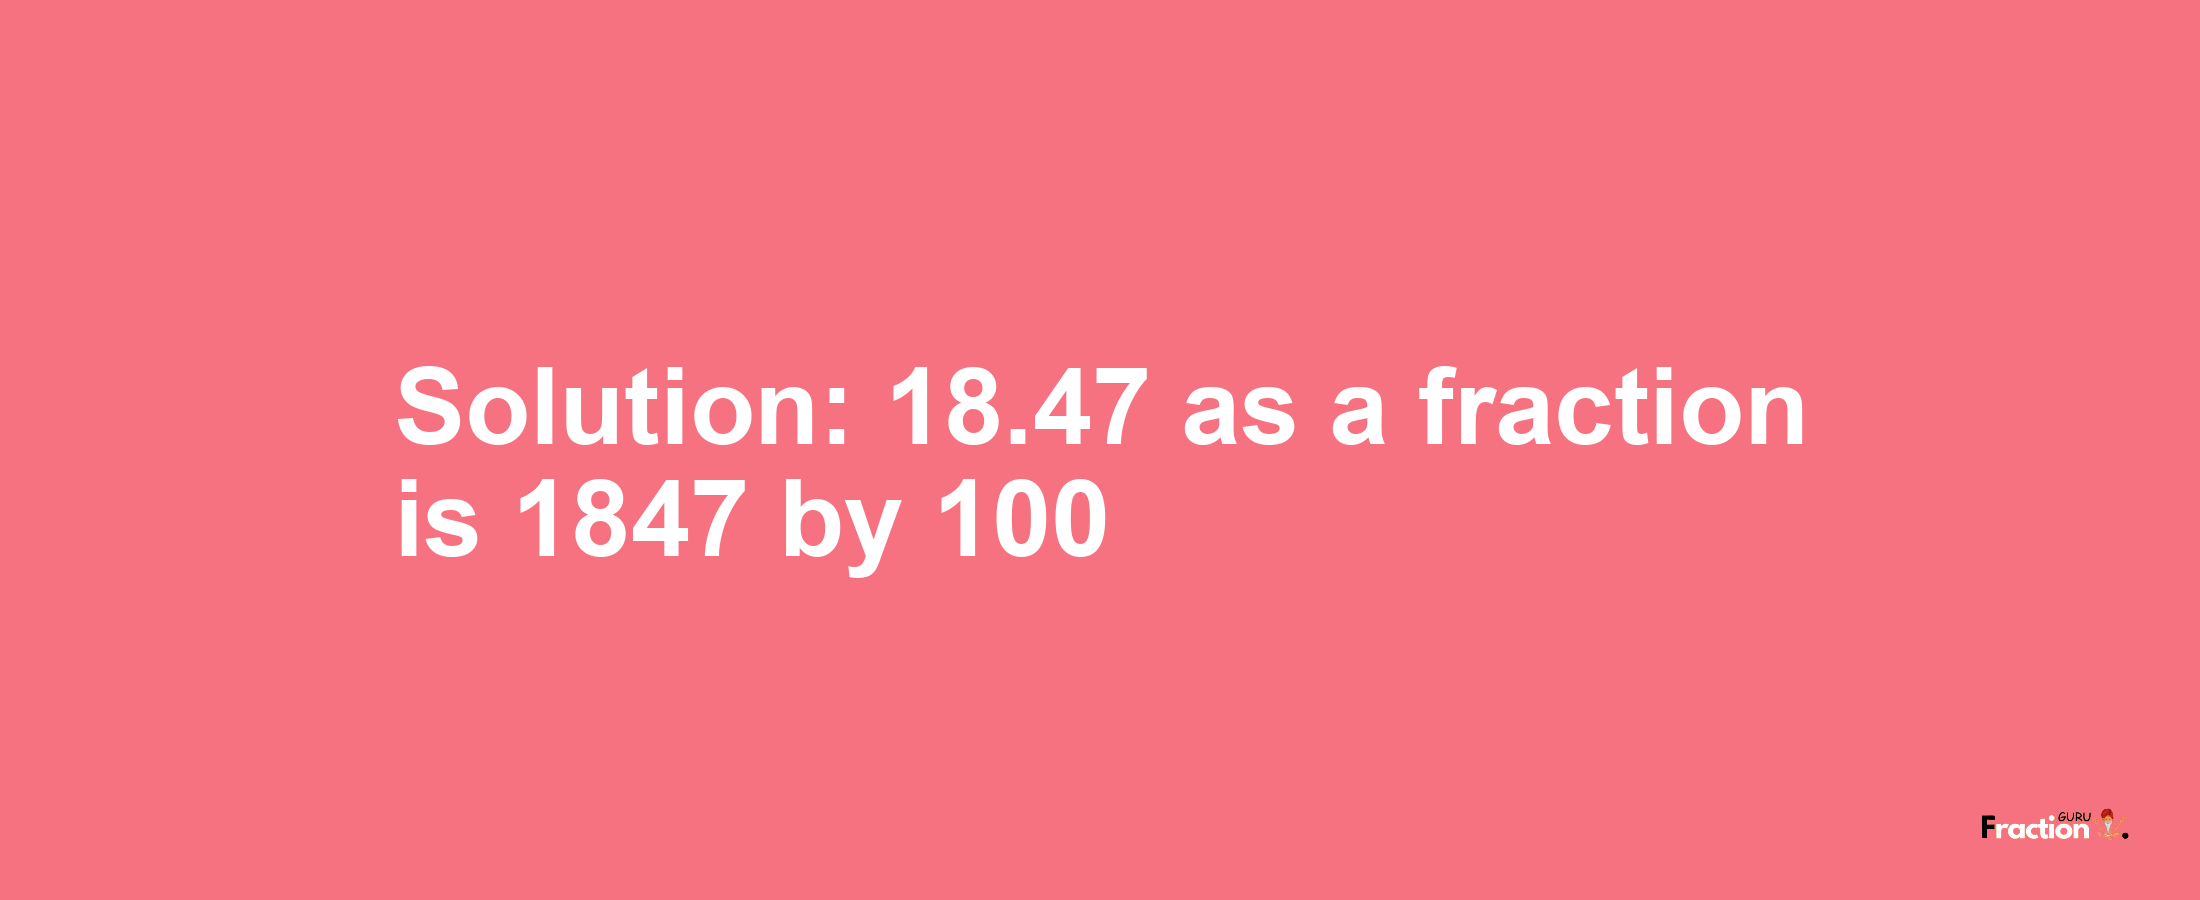 Solution:18.47 as a fraction is 1847/100